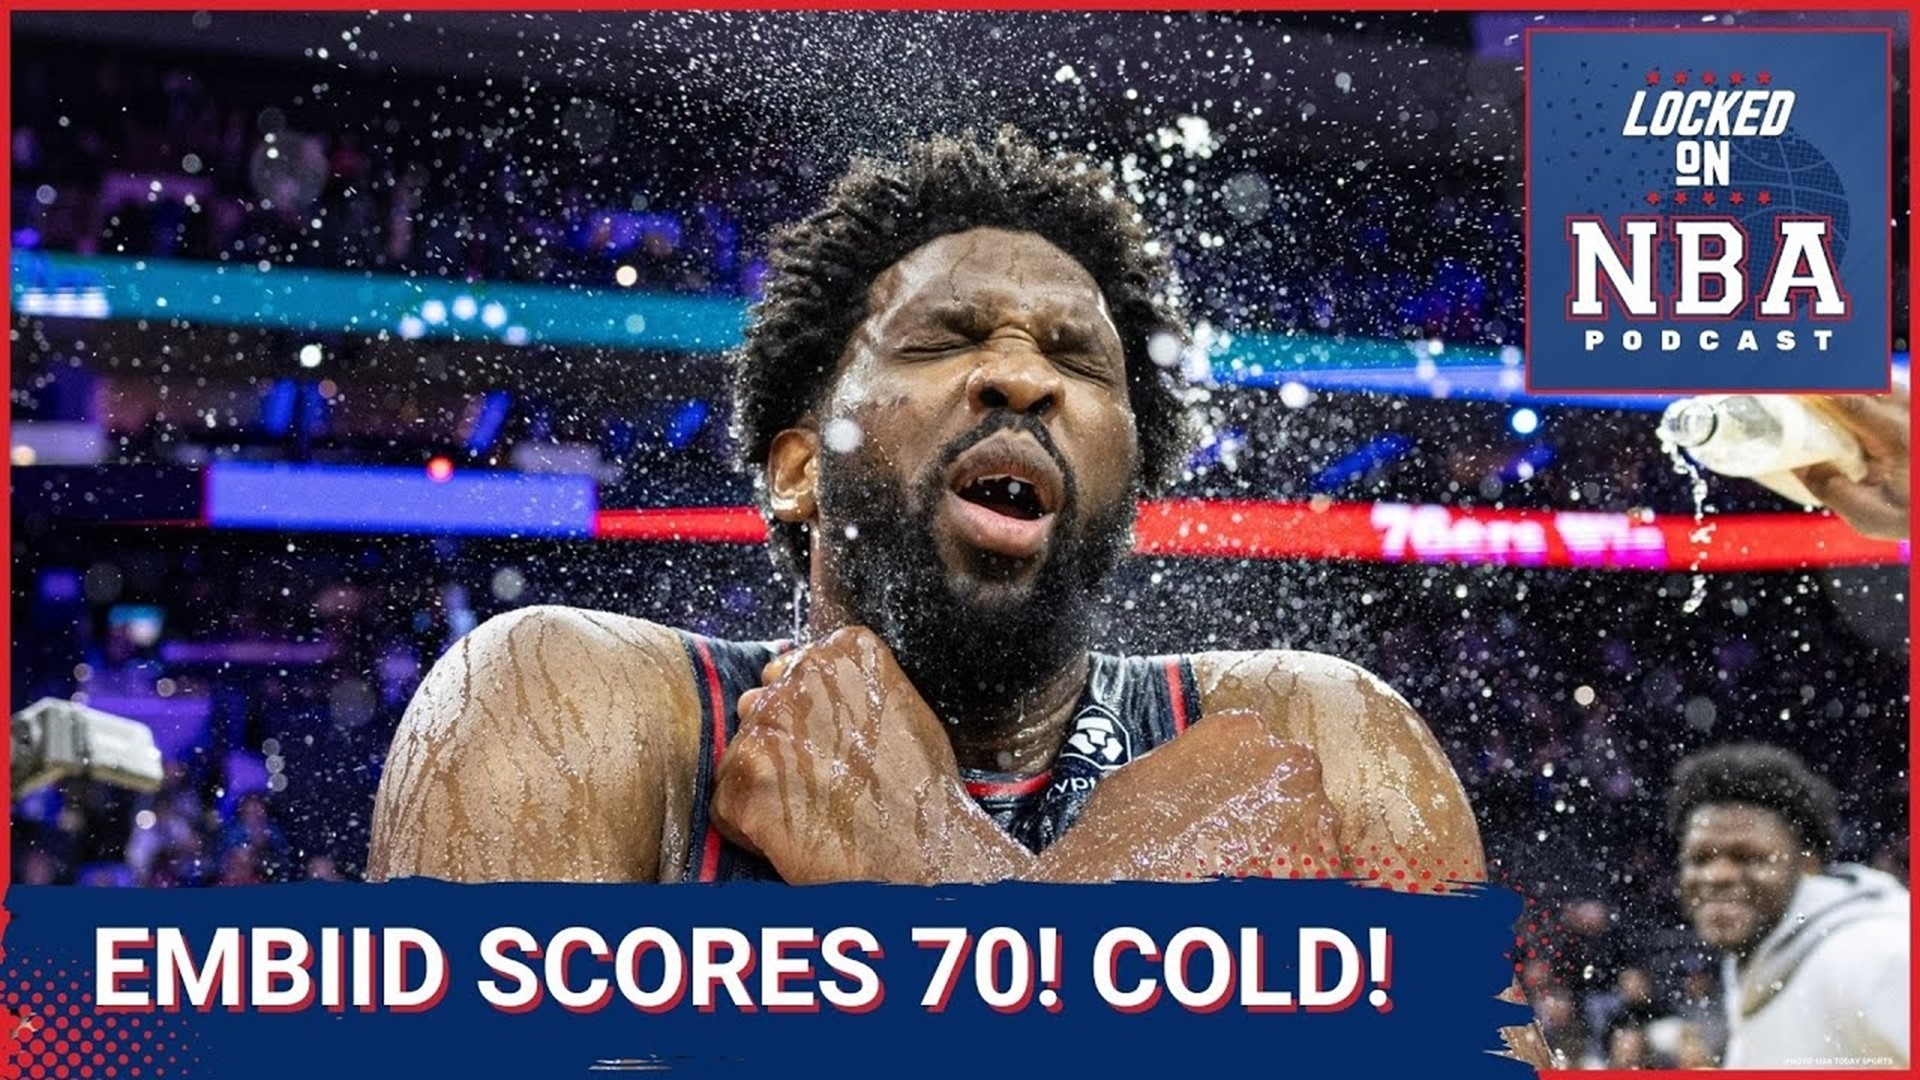 Joel Embiid is a MONSTER!!! Embiid scores 70 in a win over the Spurs and Matt Moore and David Ramil react to the 9th 70+ scoring performance in NBA history.